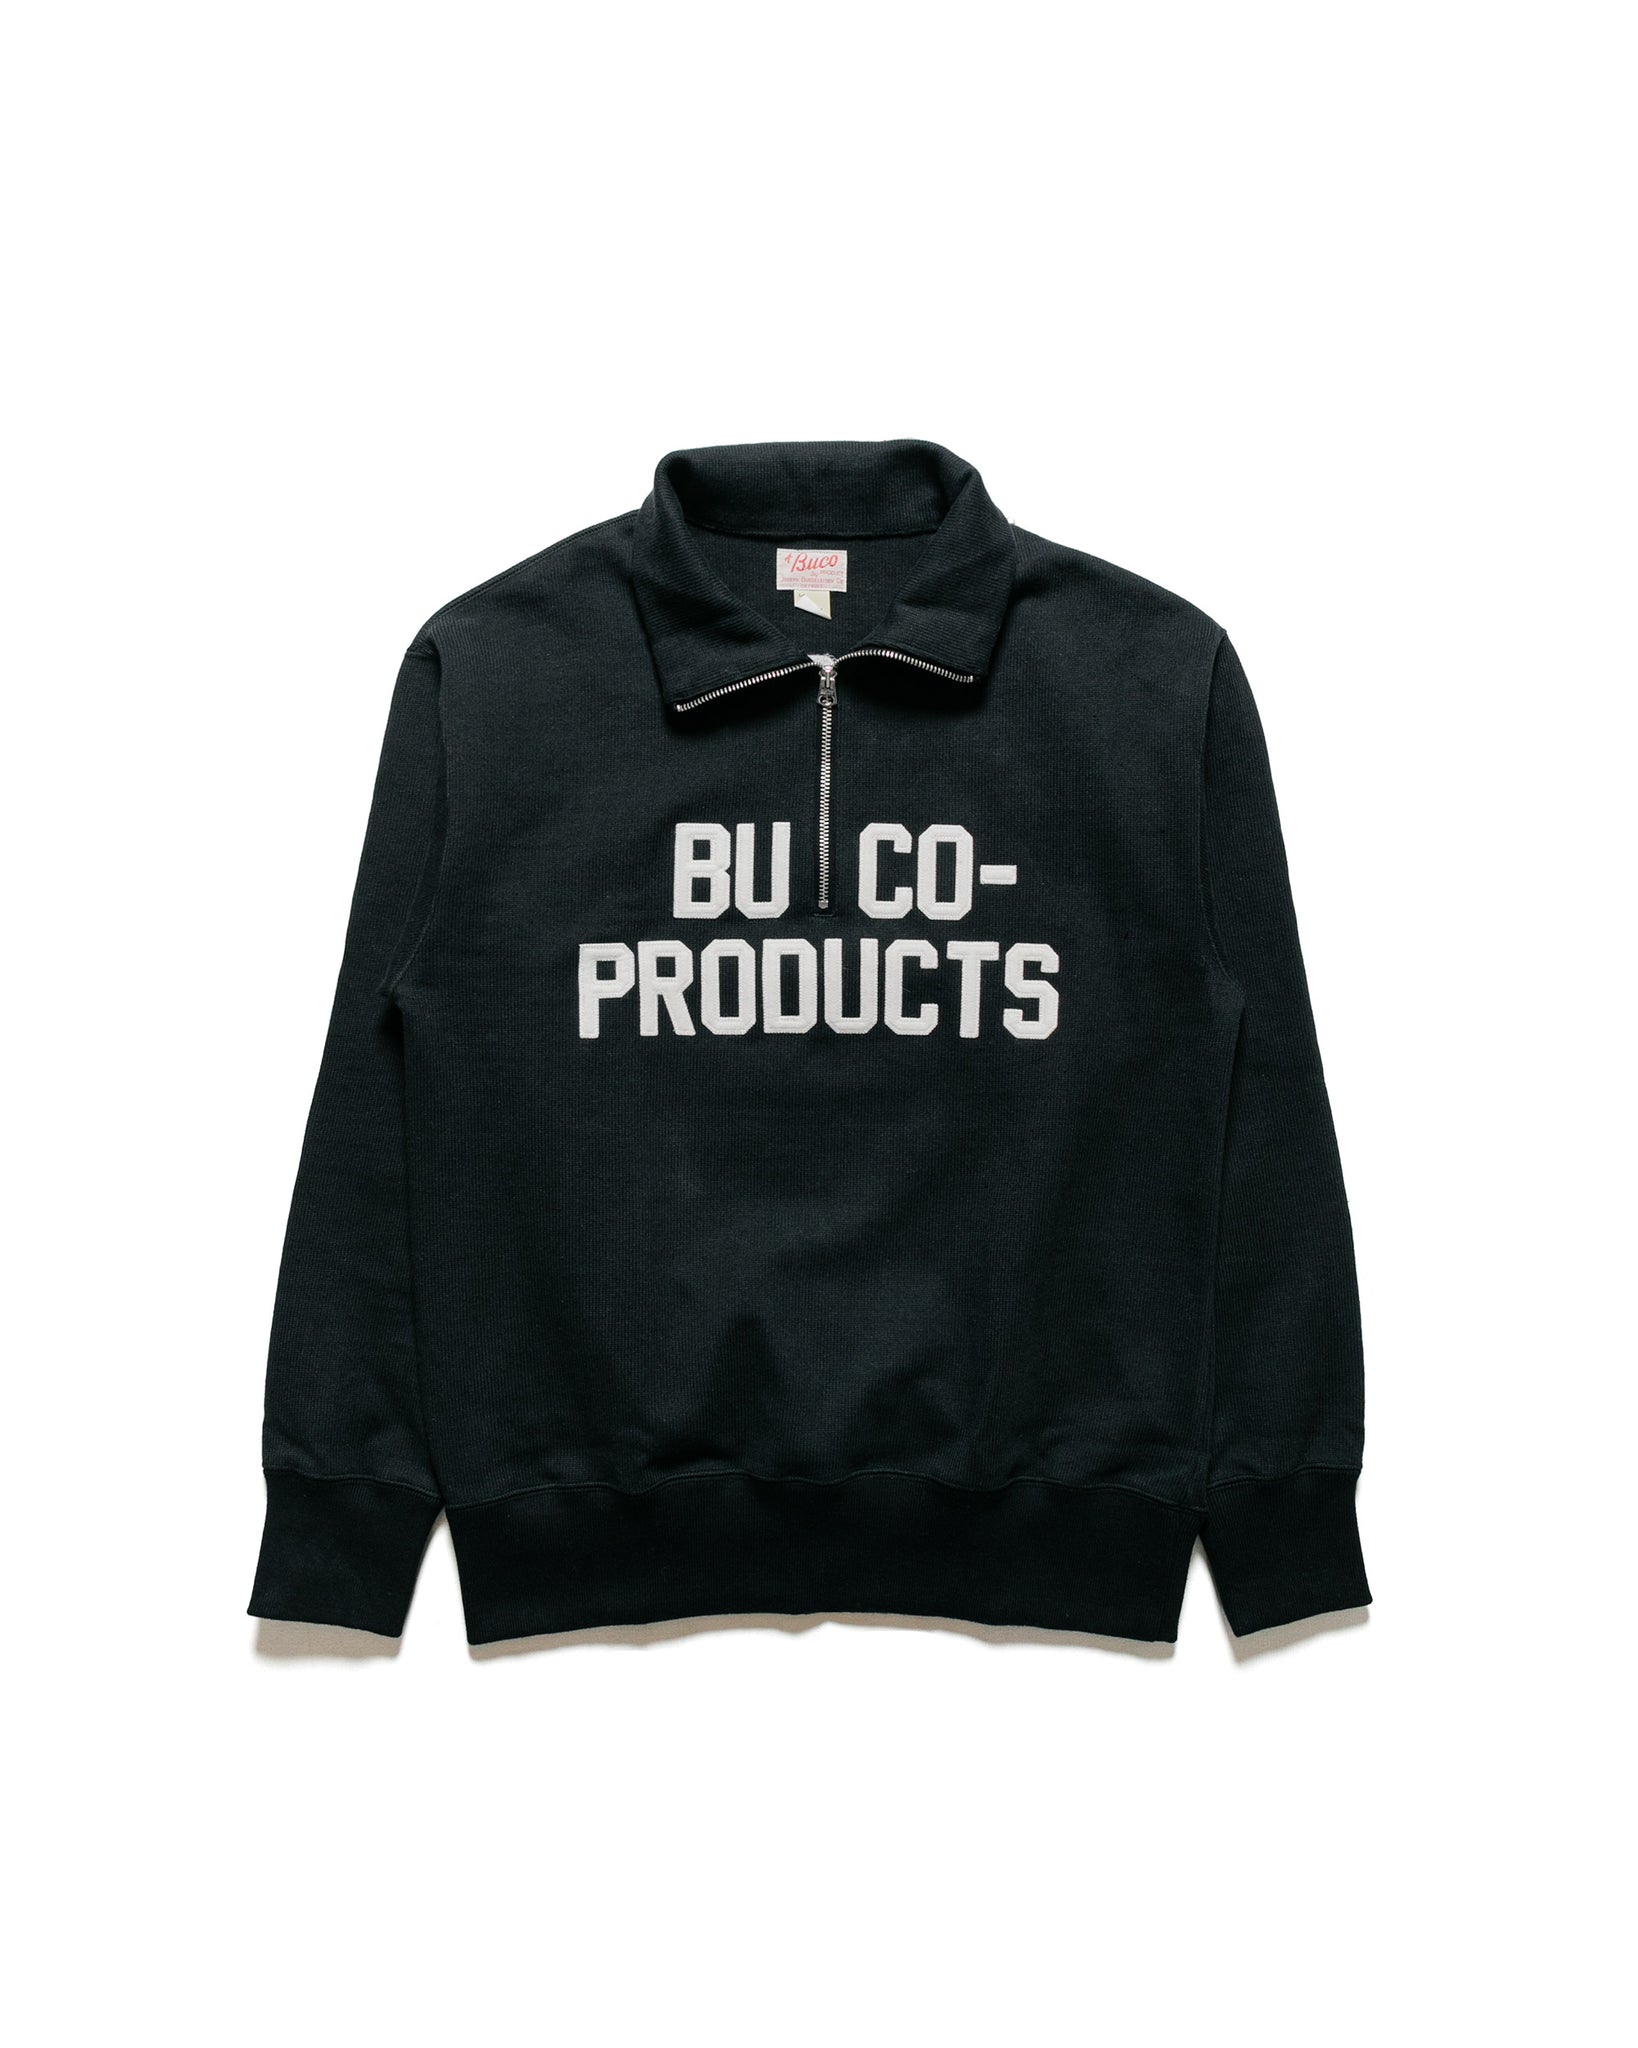 The Real McCoy's BC23104 Buco Half-Zip Motorcycle Jersey / Buco-Product Black